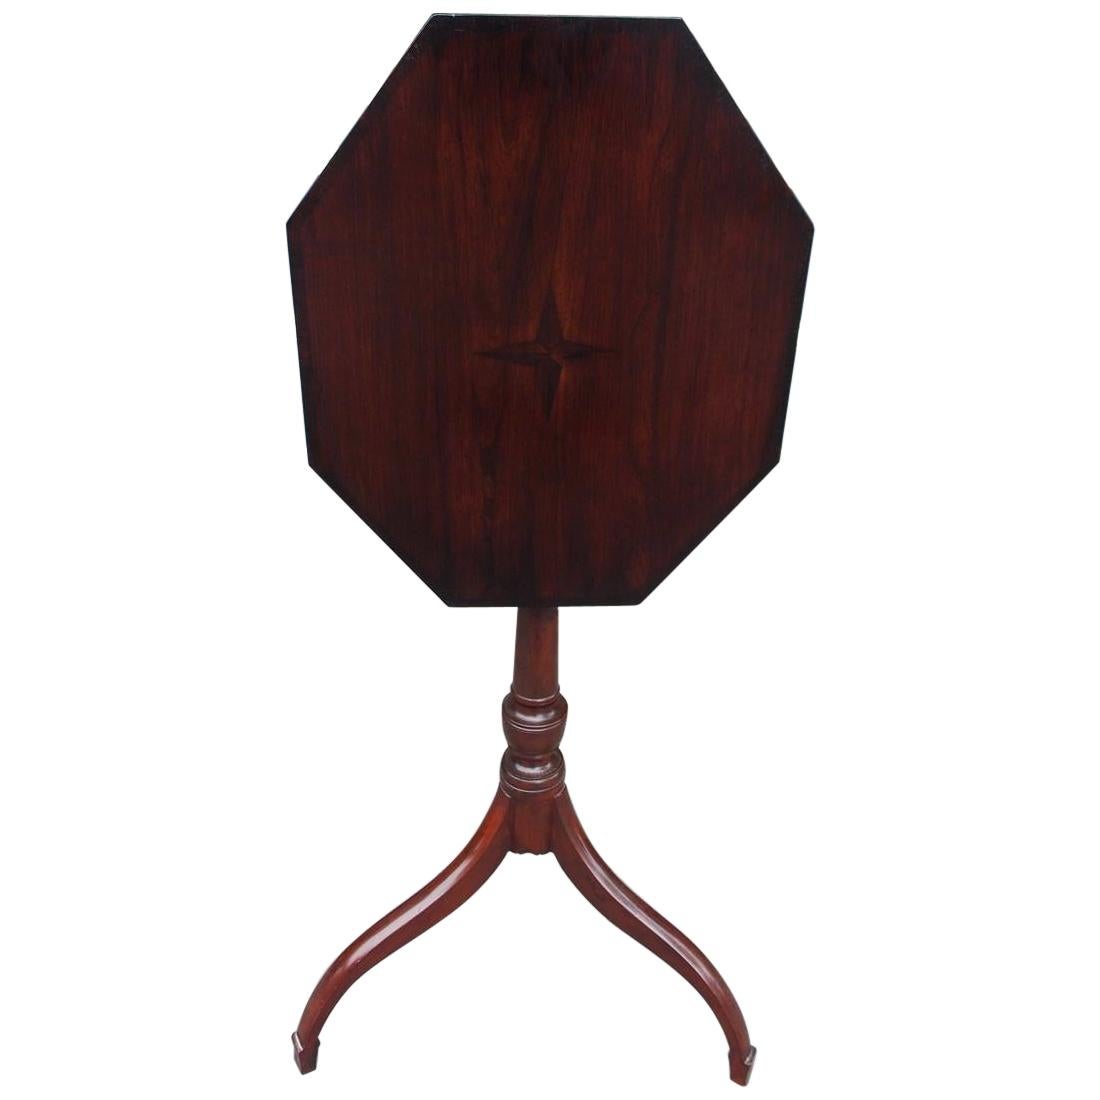  American Hepplewhite Mahogany Star Inlaid Candle Stand on Saber Legs, C. 1790 For Sale